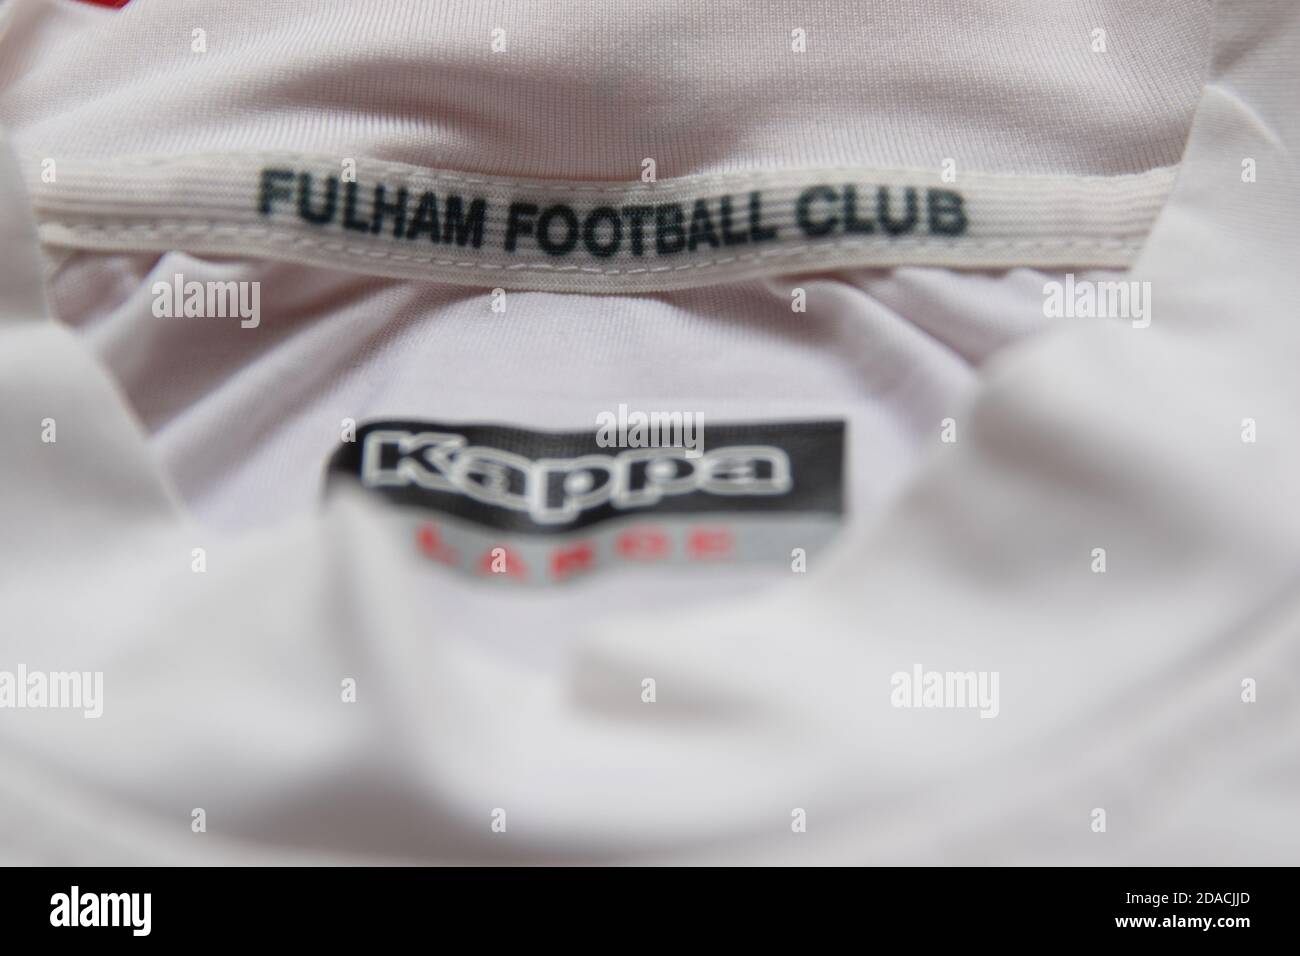 Fulham Football Club in the collar of a white Kappa football shirt Stock Photo